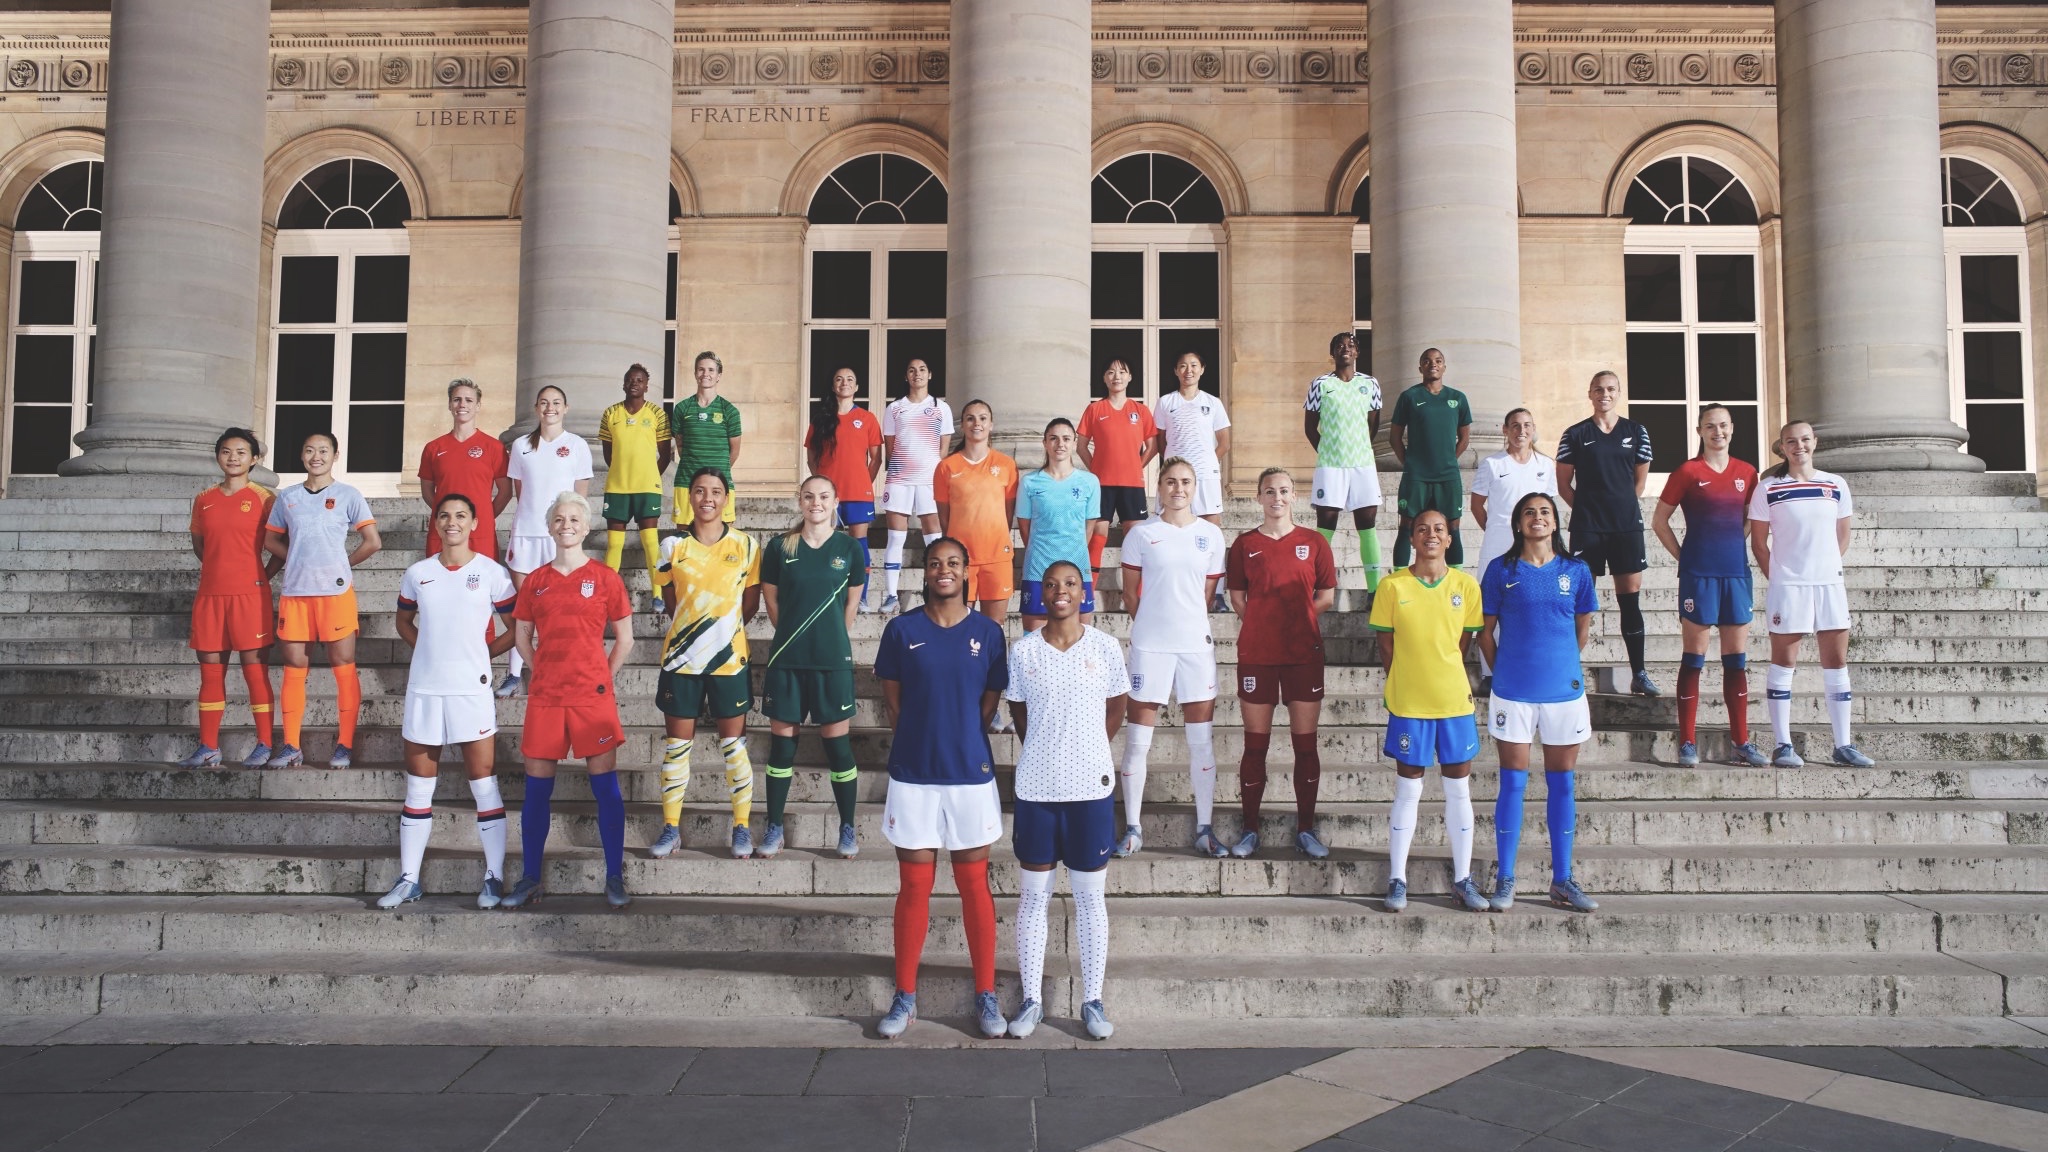 Nike’s 2019 football kits to debut on national teams this month. Photo Elaine Constantine